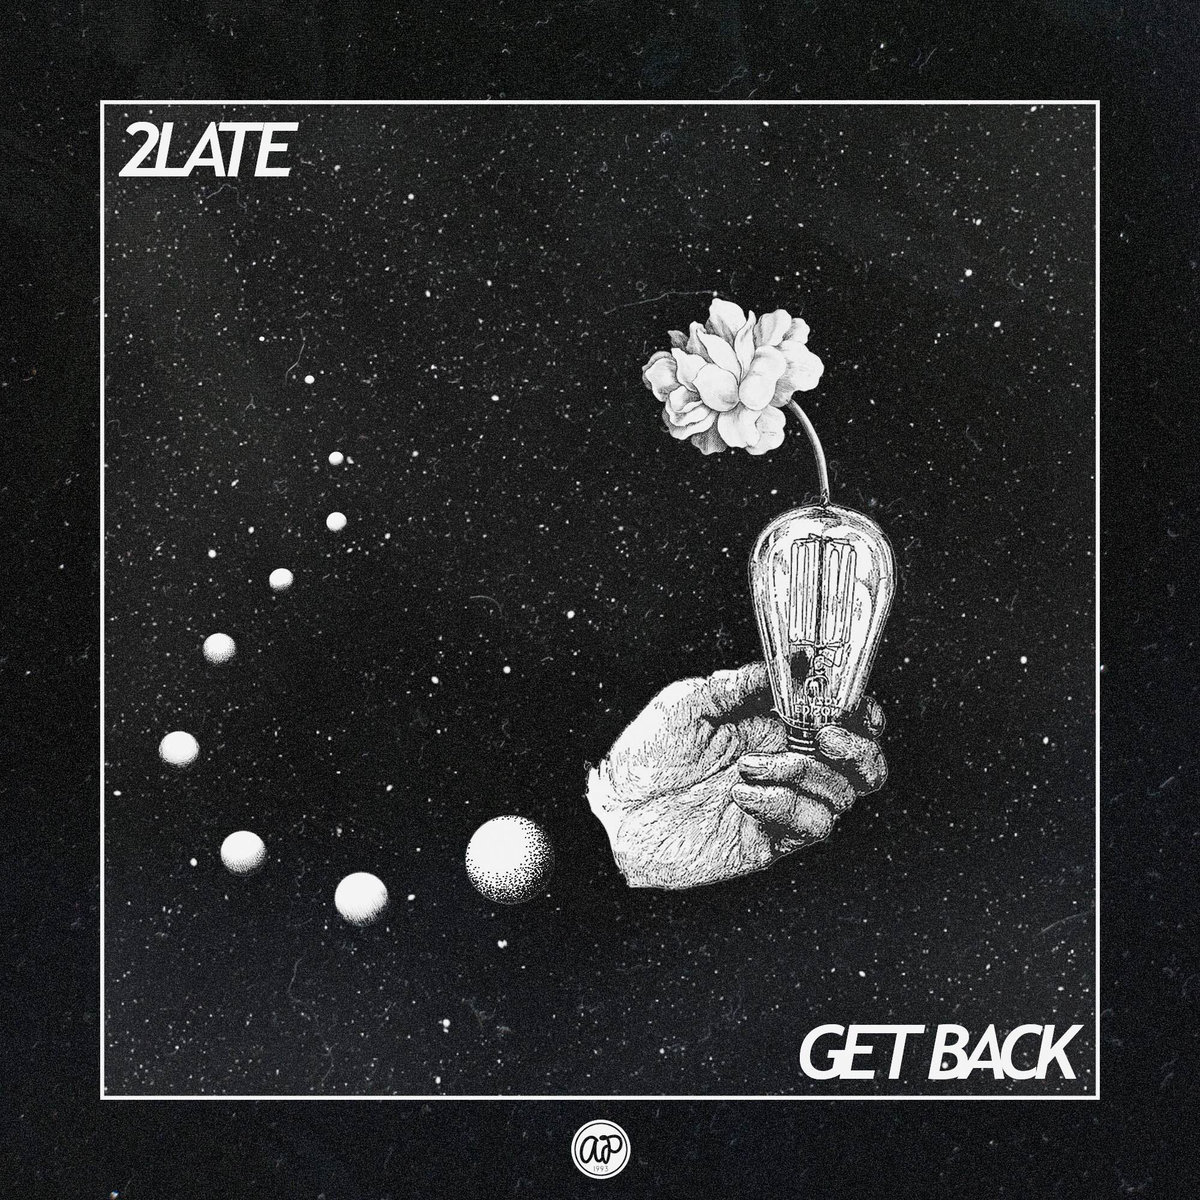 2LATE - "Get Back" (Release)